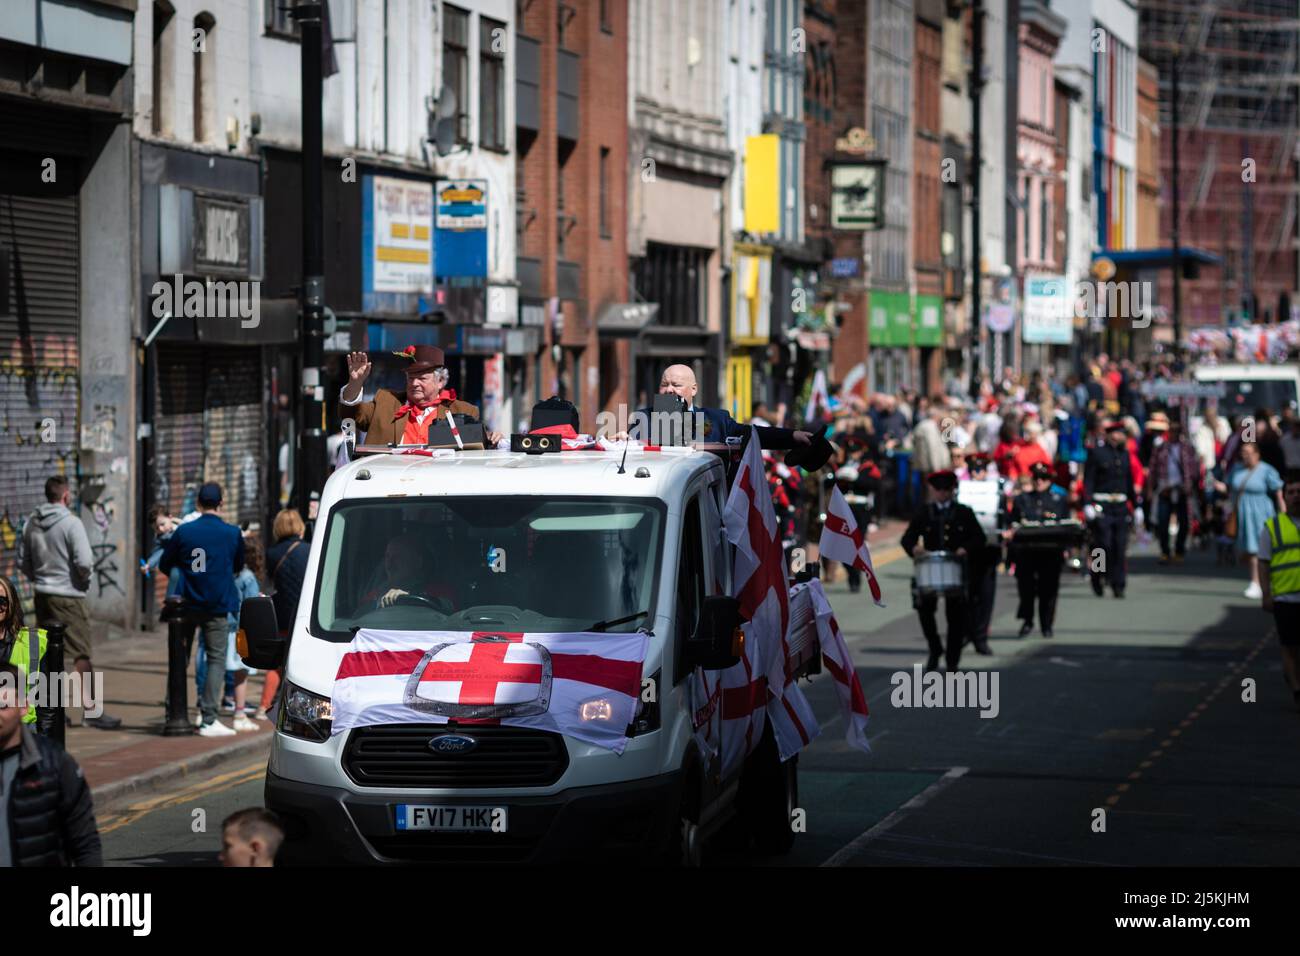 Manchester, UK. 24th Apr, 2022. The public line the streets as the annual St Georges Day parade passes through the city. Hundreds of people join in the annual celebration which marks the death of the patron Saint Of England. Credit: Andy Barton/Alamy Live News Stock Photo